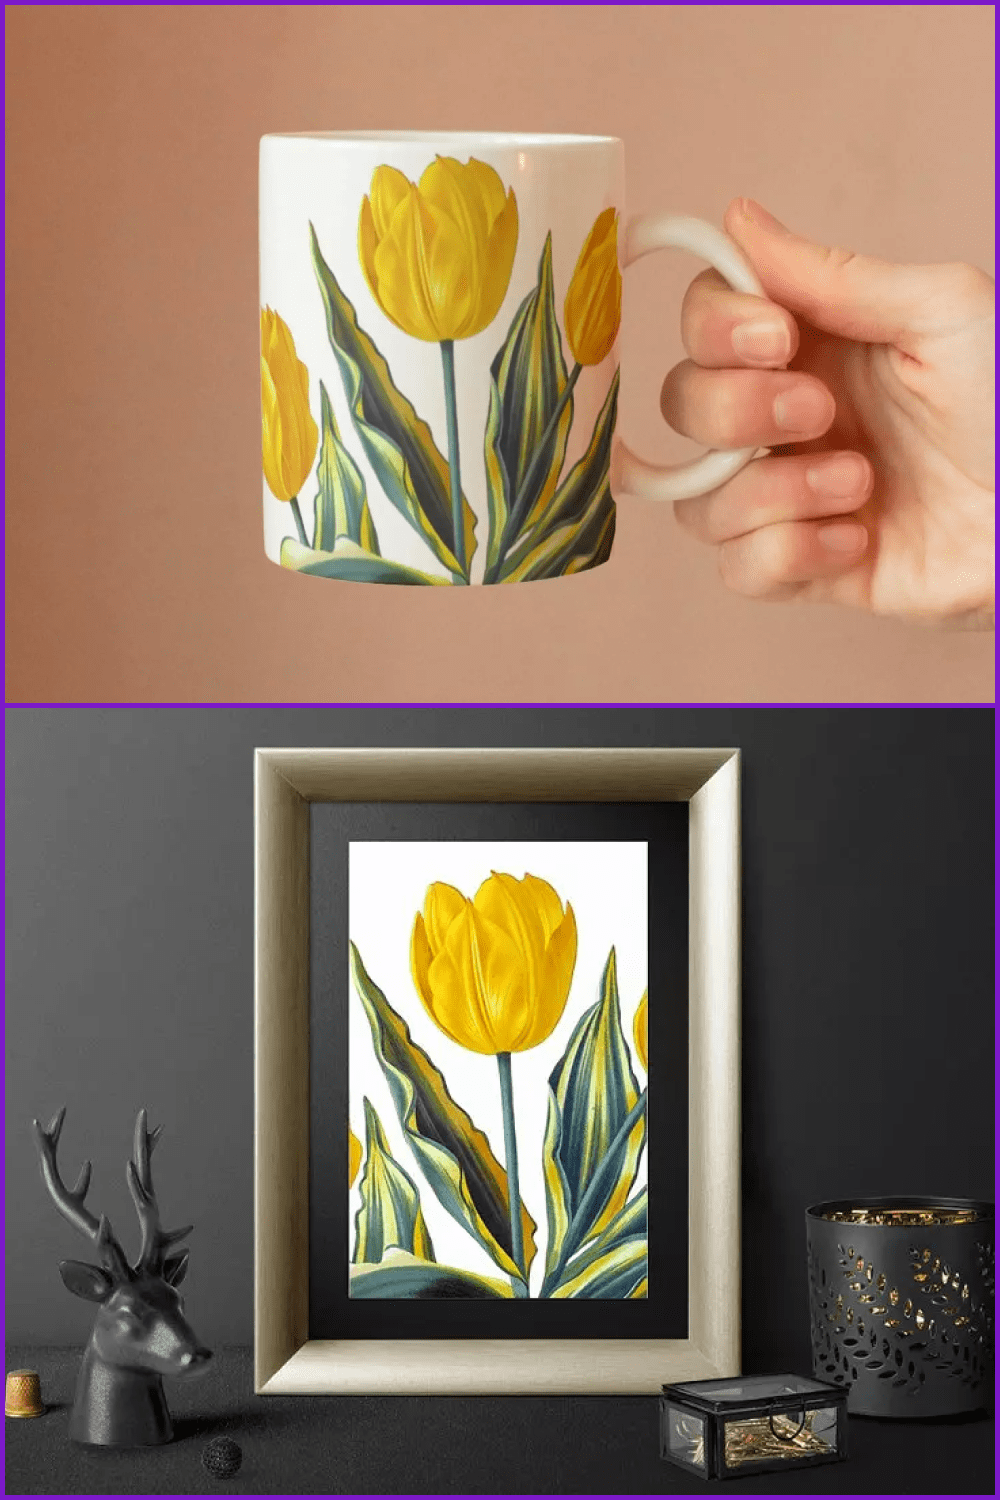 Bright yellow tulip on the cap and in painting.